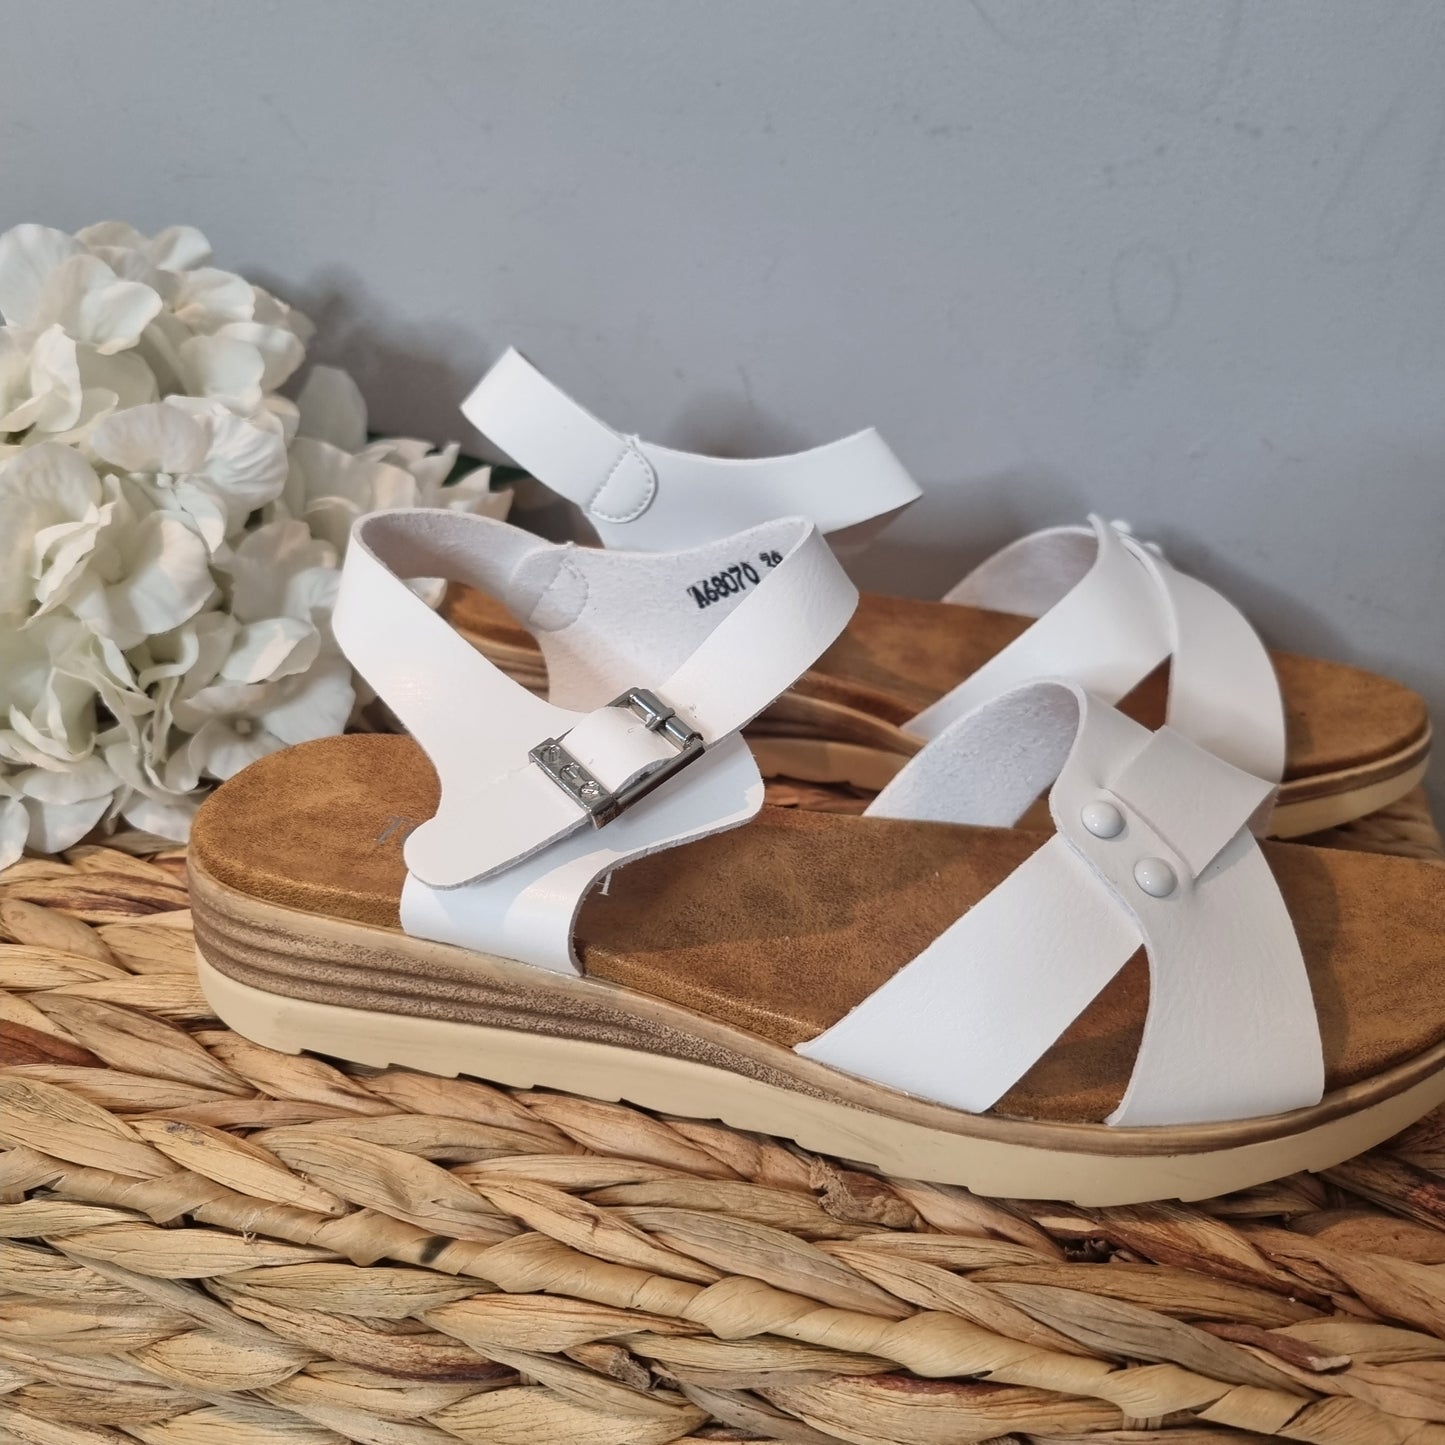 Faux Leather Sandal with Buckle Strap